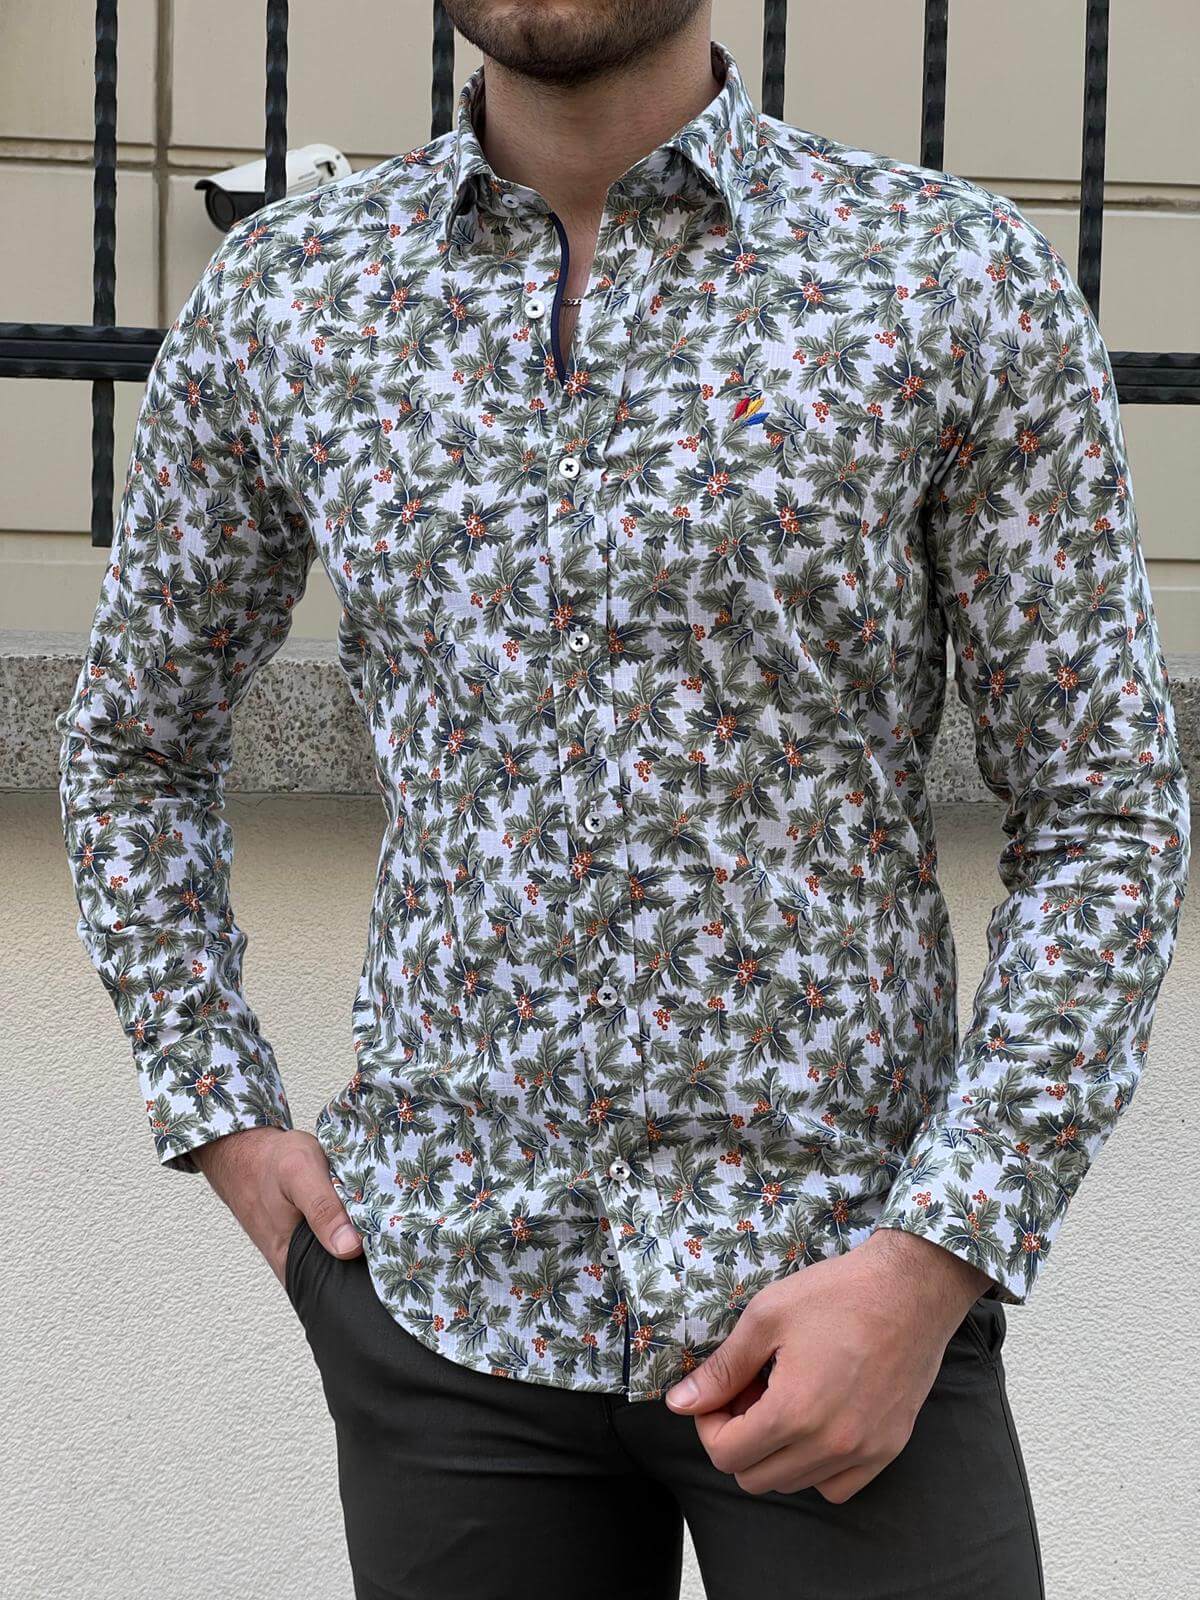 A stylish green shirt adorned with beautiful flowers